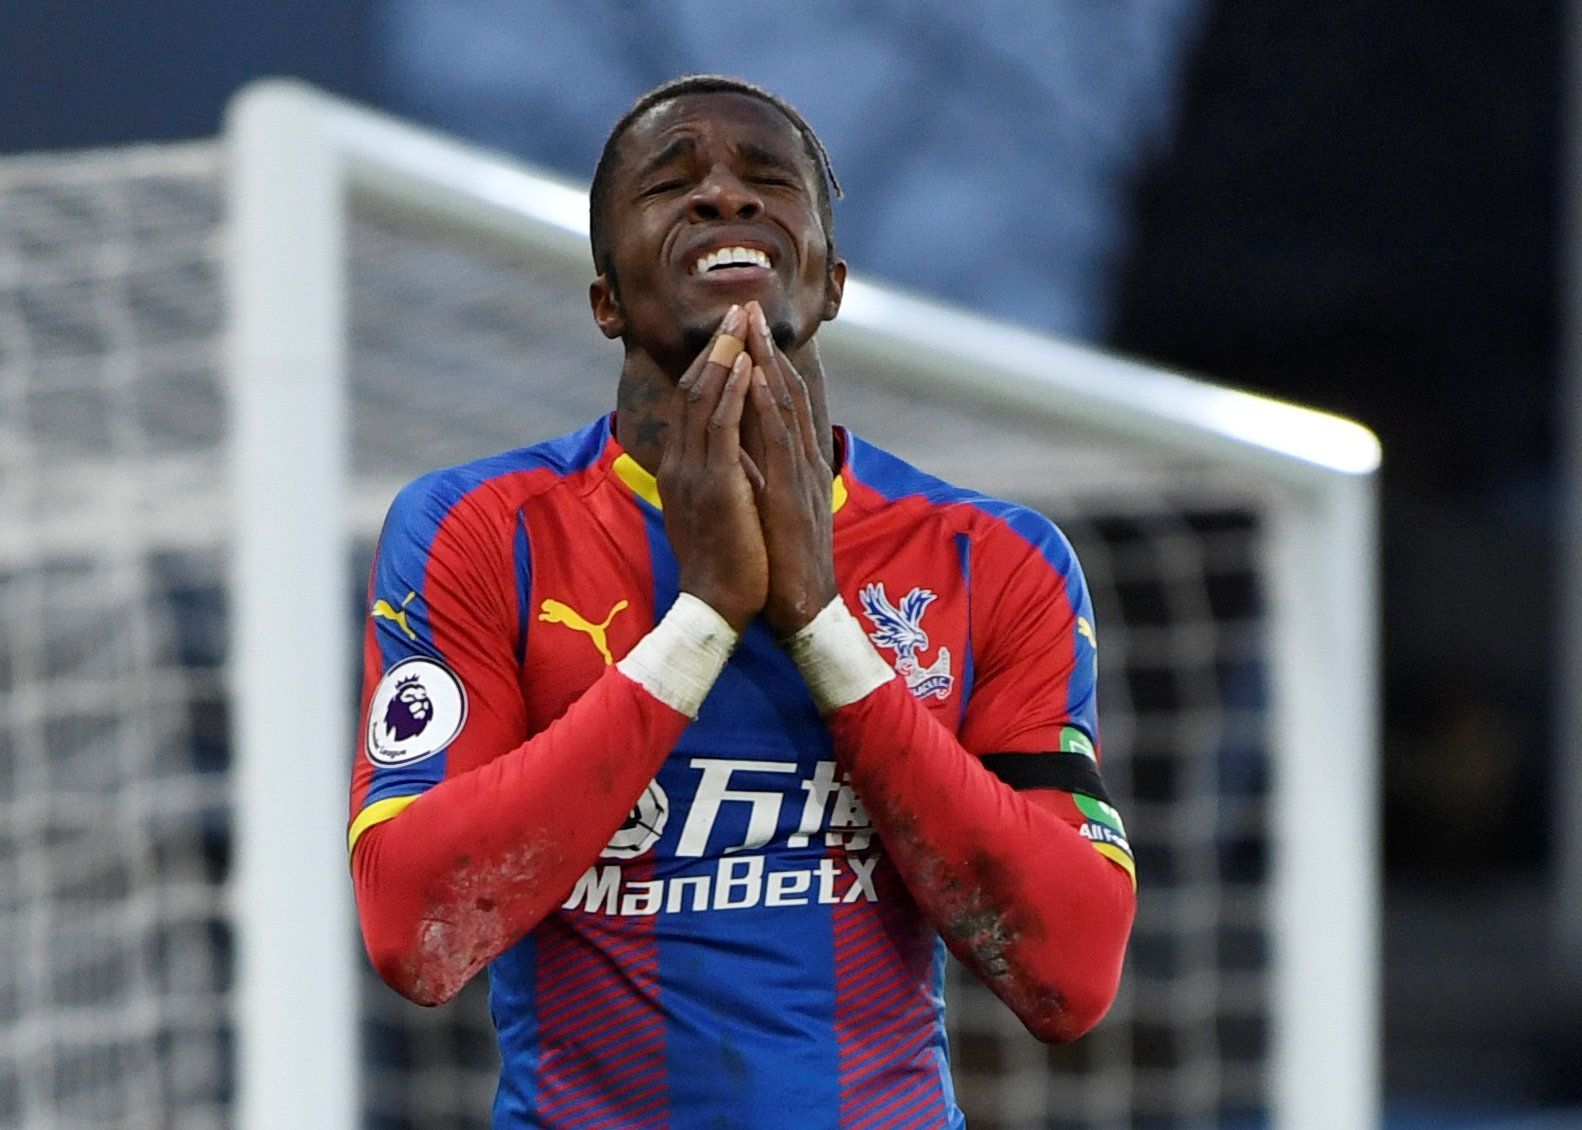 Soccer Football - Premier League - Crystal Palace v West Ham United - Selhurst Park, London, Britain - February 9, 2019  Crystal Palace's Wilfried Zaha reacts after a missed chance      Action Images via Reuters/Tony O'Brien  EDITORIAL USE ONLY. No use with unauthorized audio, video, data, fixture lists, club/league logos or "live" services. Online in-match use limited to 75 images, no video emulation. No use in betting, games or single club/league/player publications.  Please contact your accou